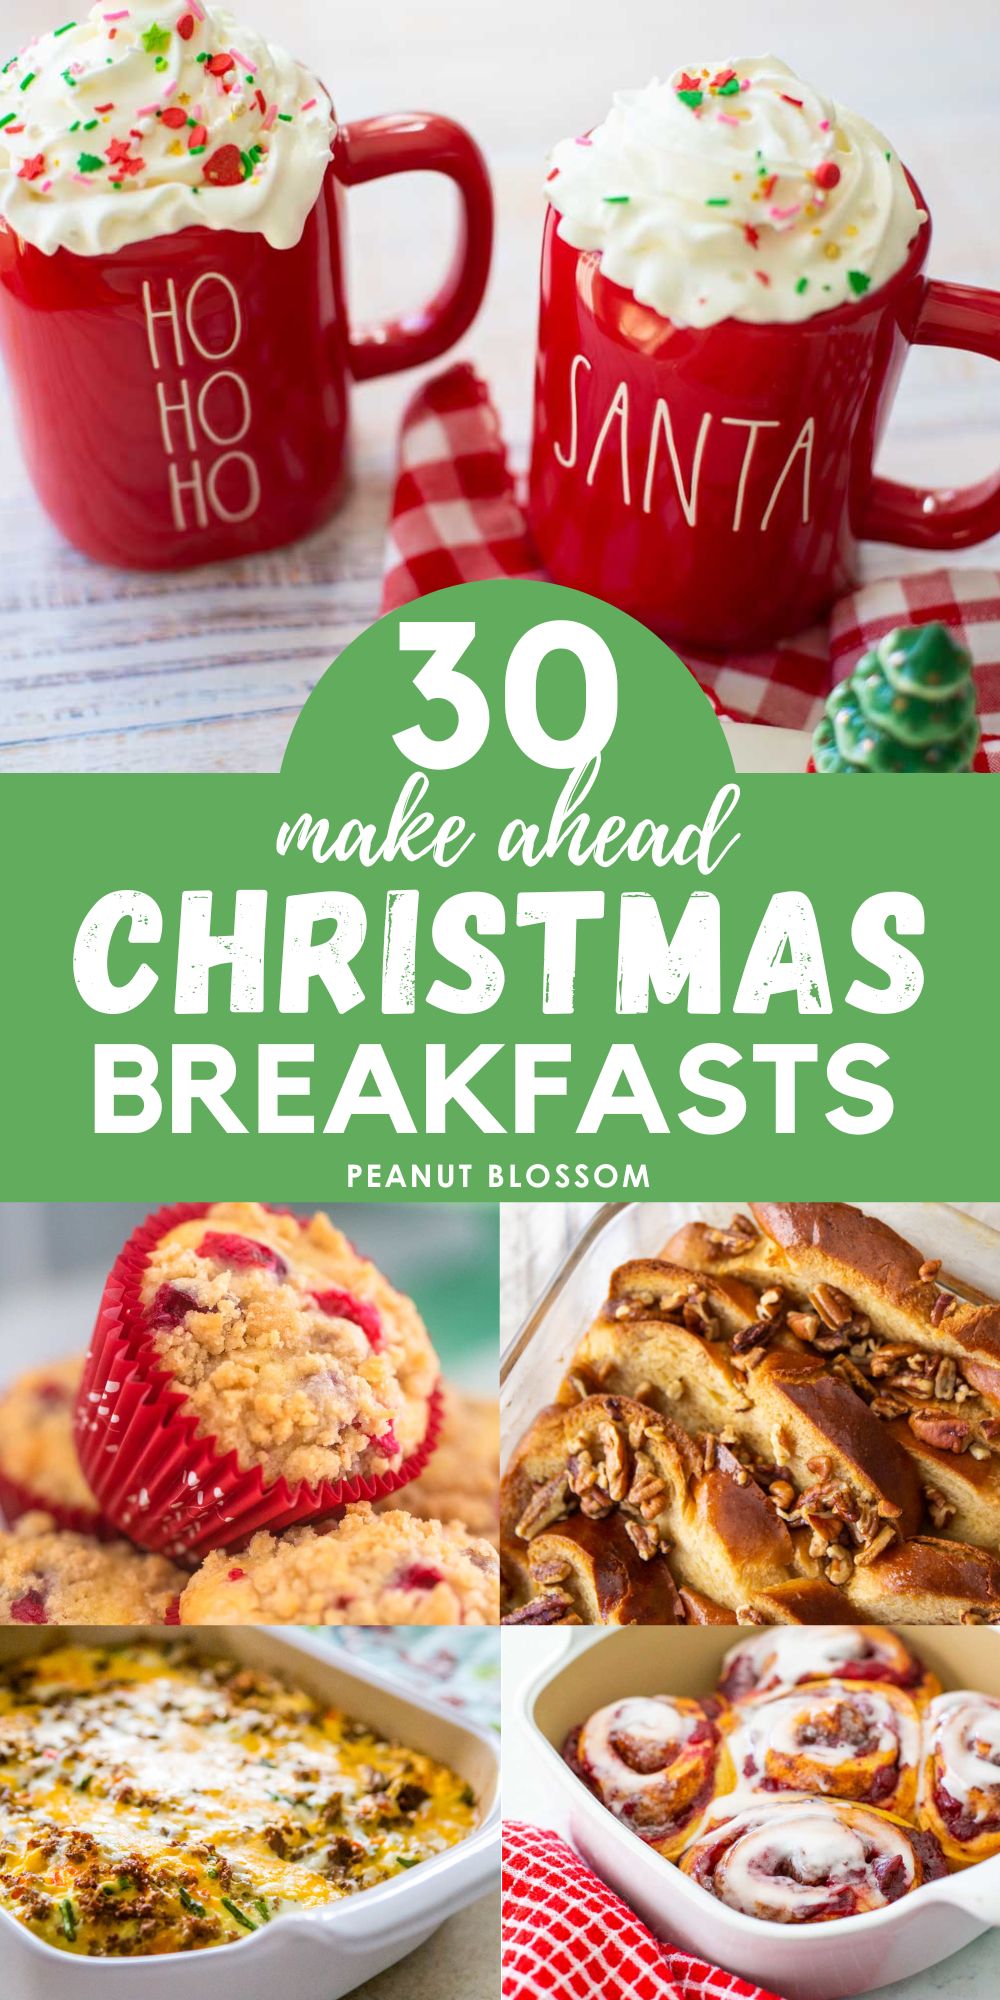 The photo collage shows several recipes that would be easy to make ahead for Christmas morning.